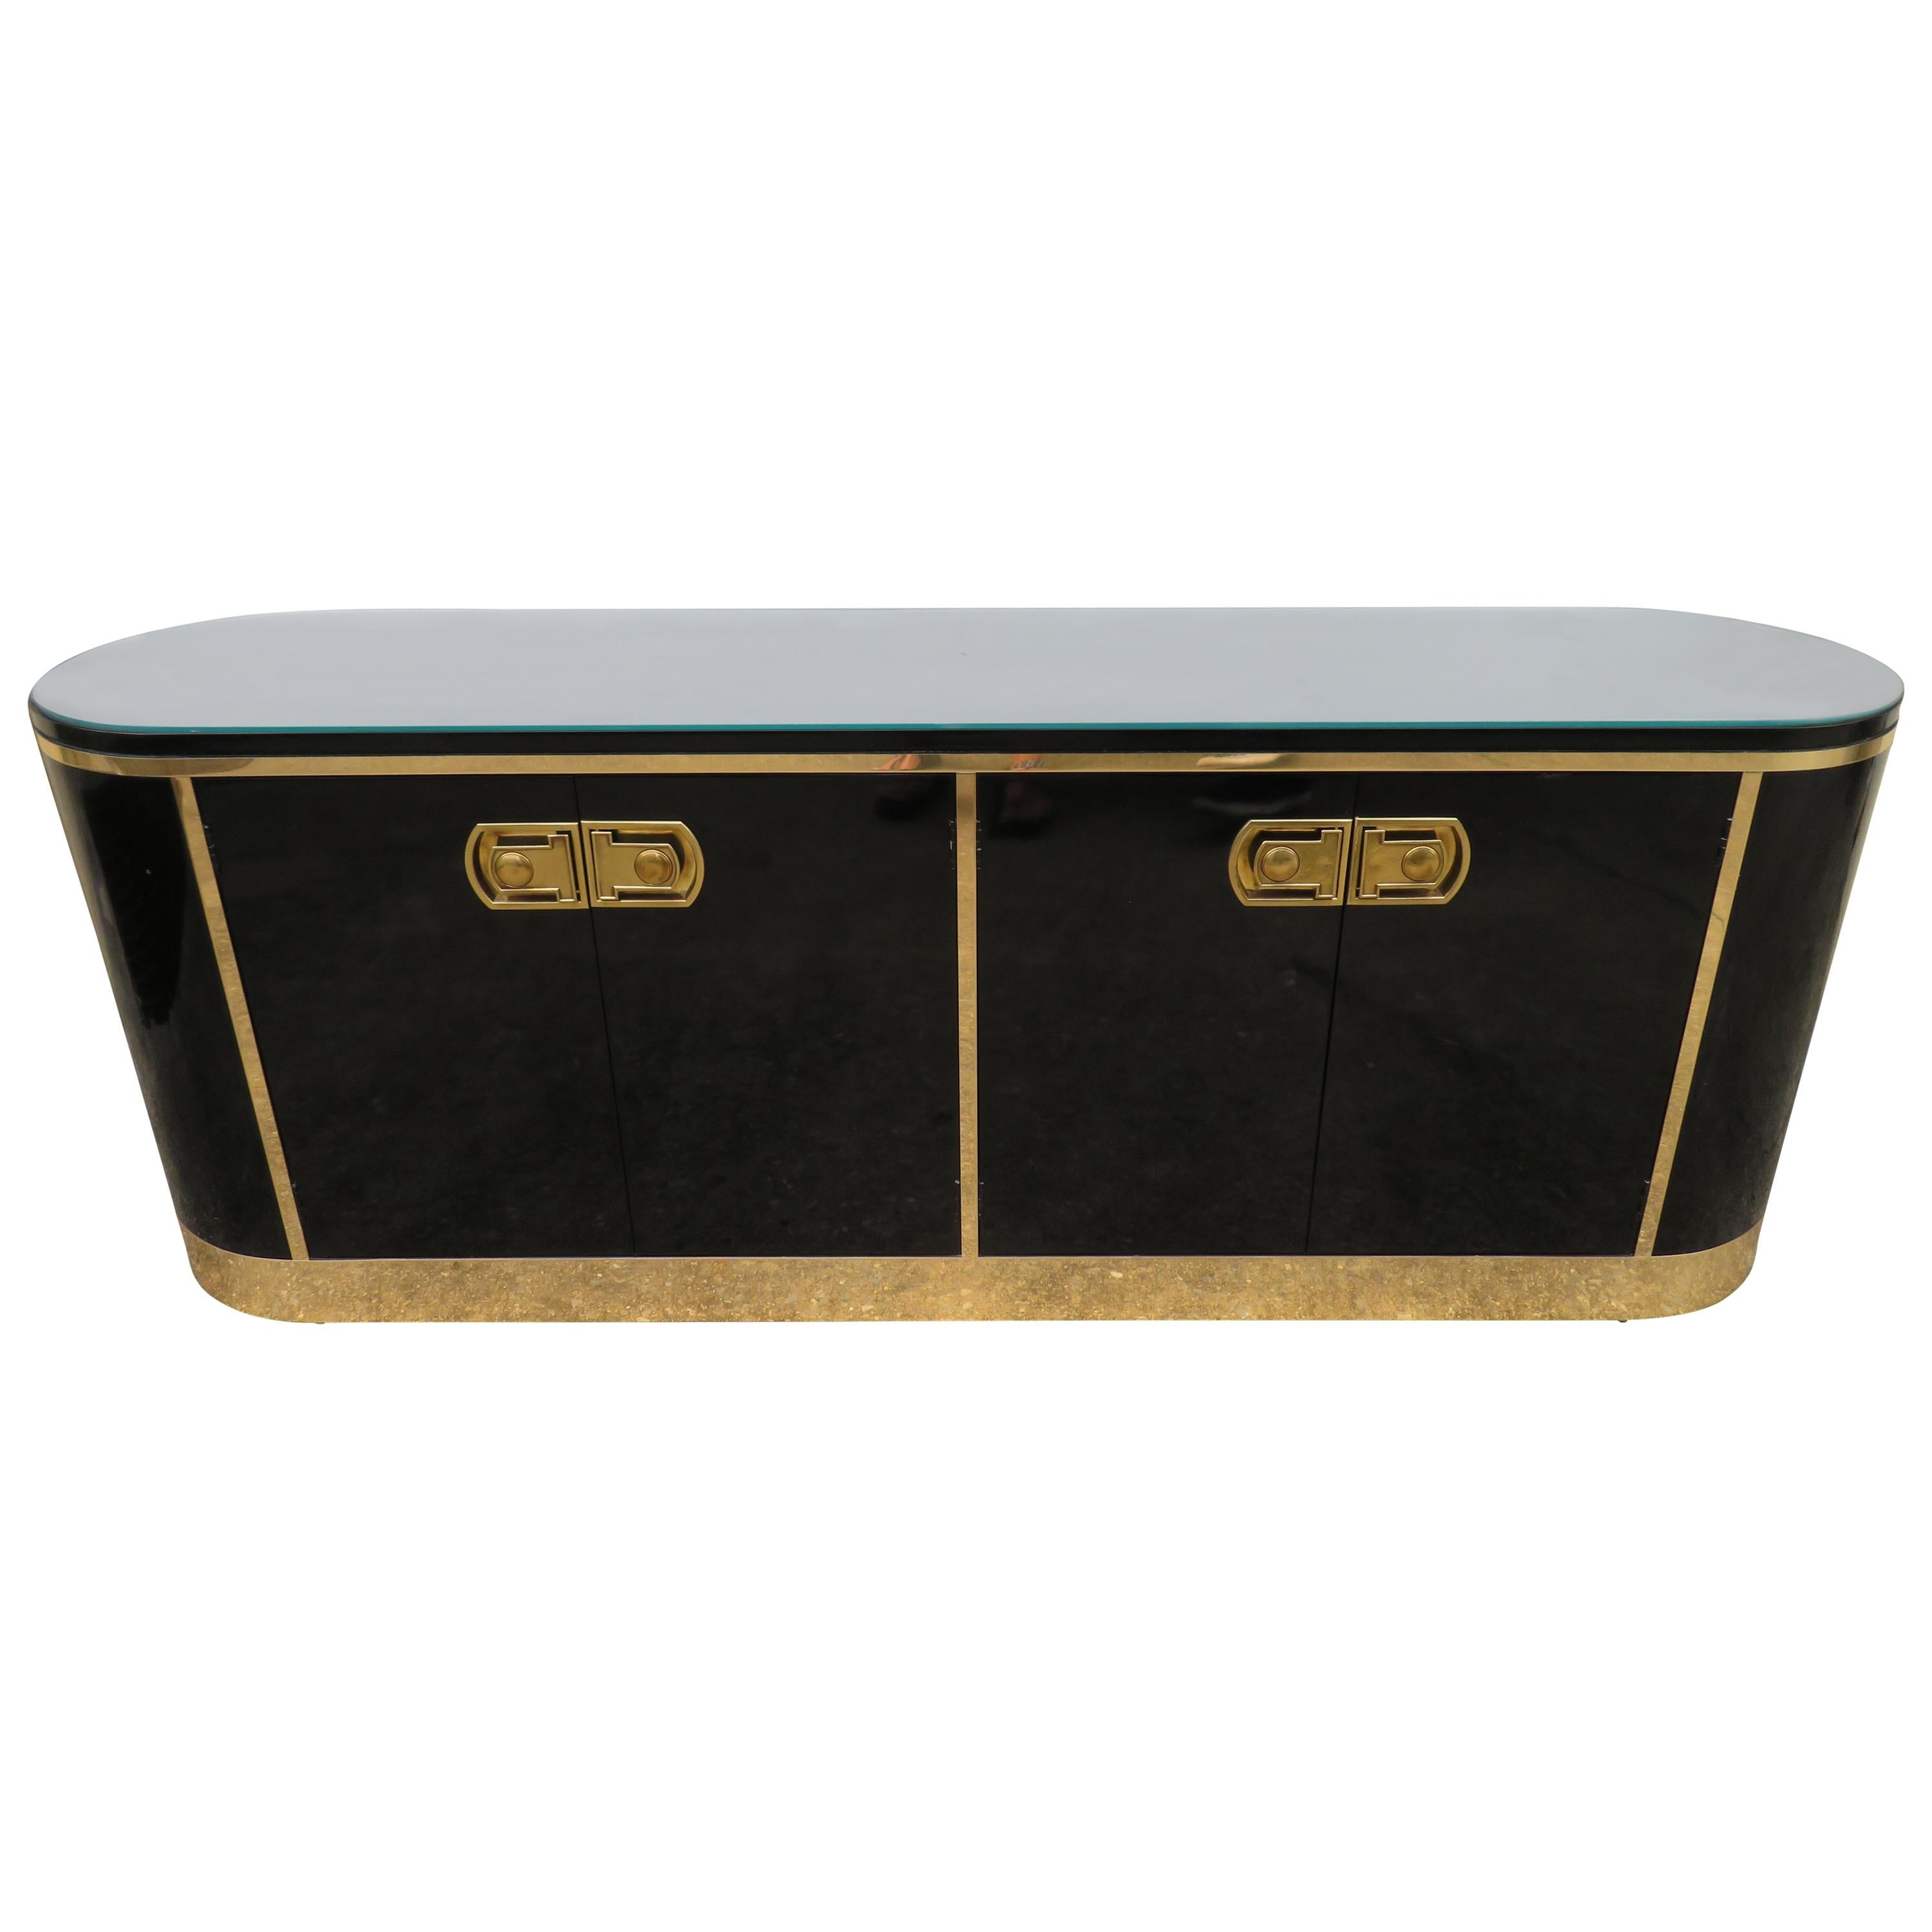 Stunning Mastercraft Black Lacquer and Polished Brass Credenza Midcentury